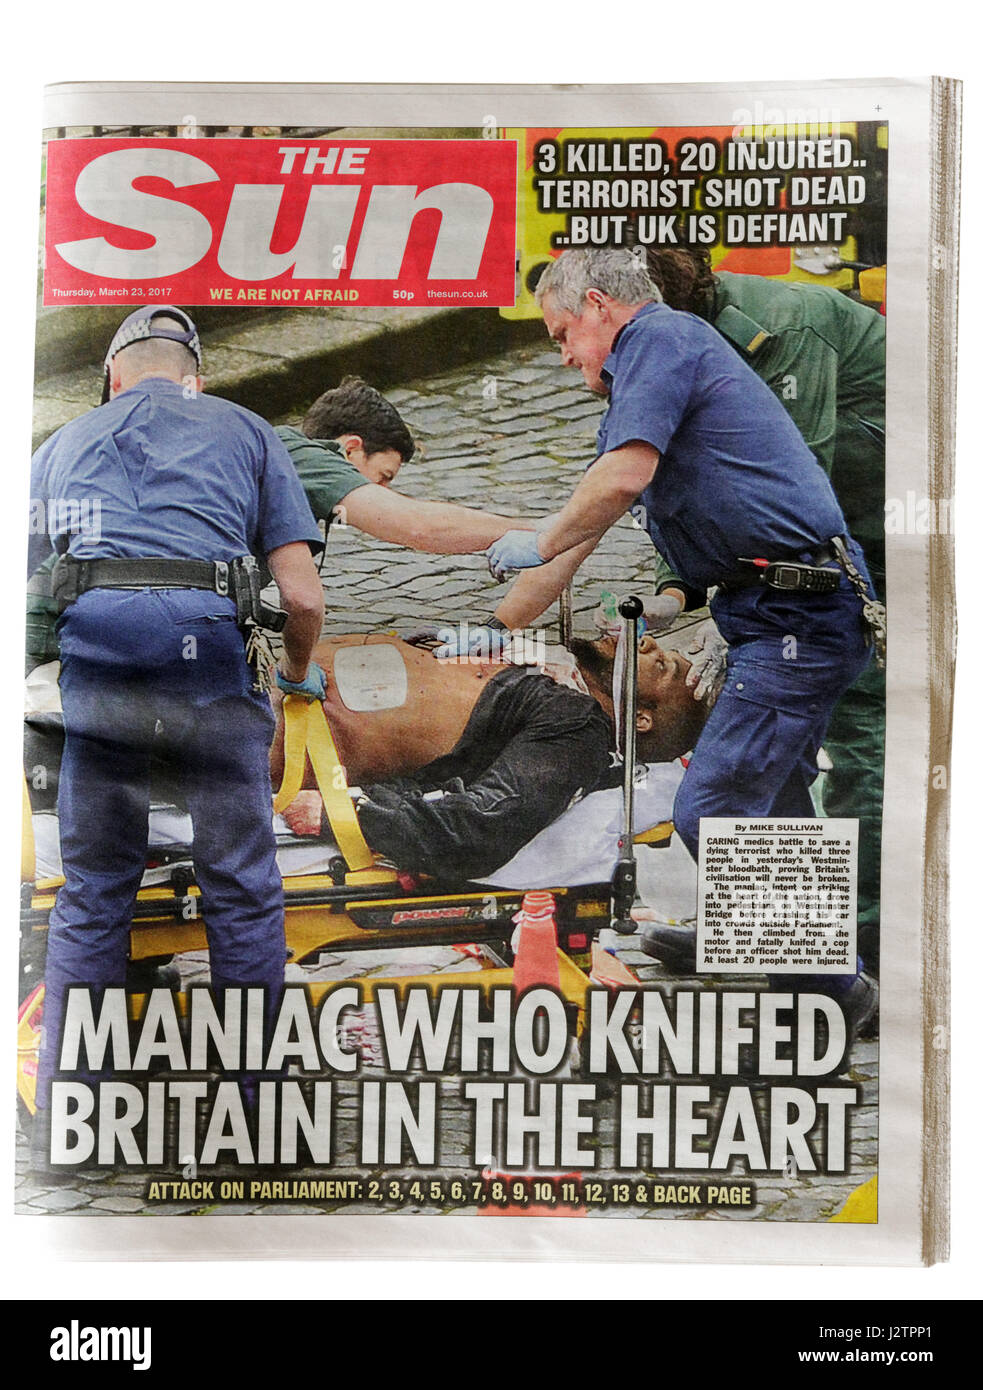 The headlines from The Sun newspaper from 23rd March 2017 after the Westminster Bridge terrorist attack in London. Stock Photo